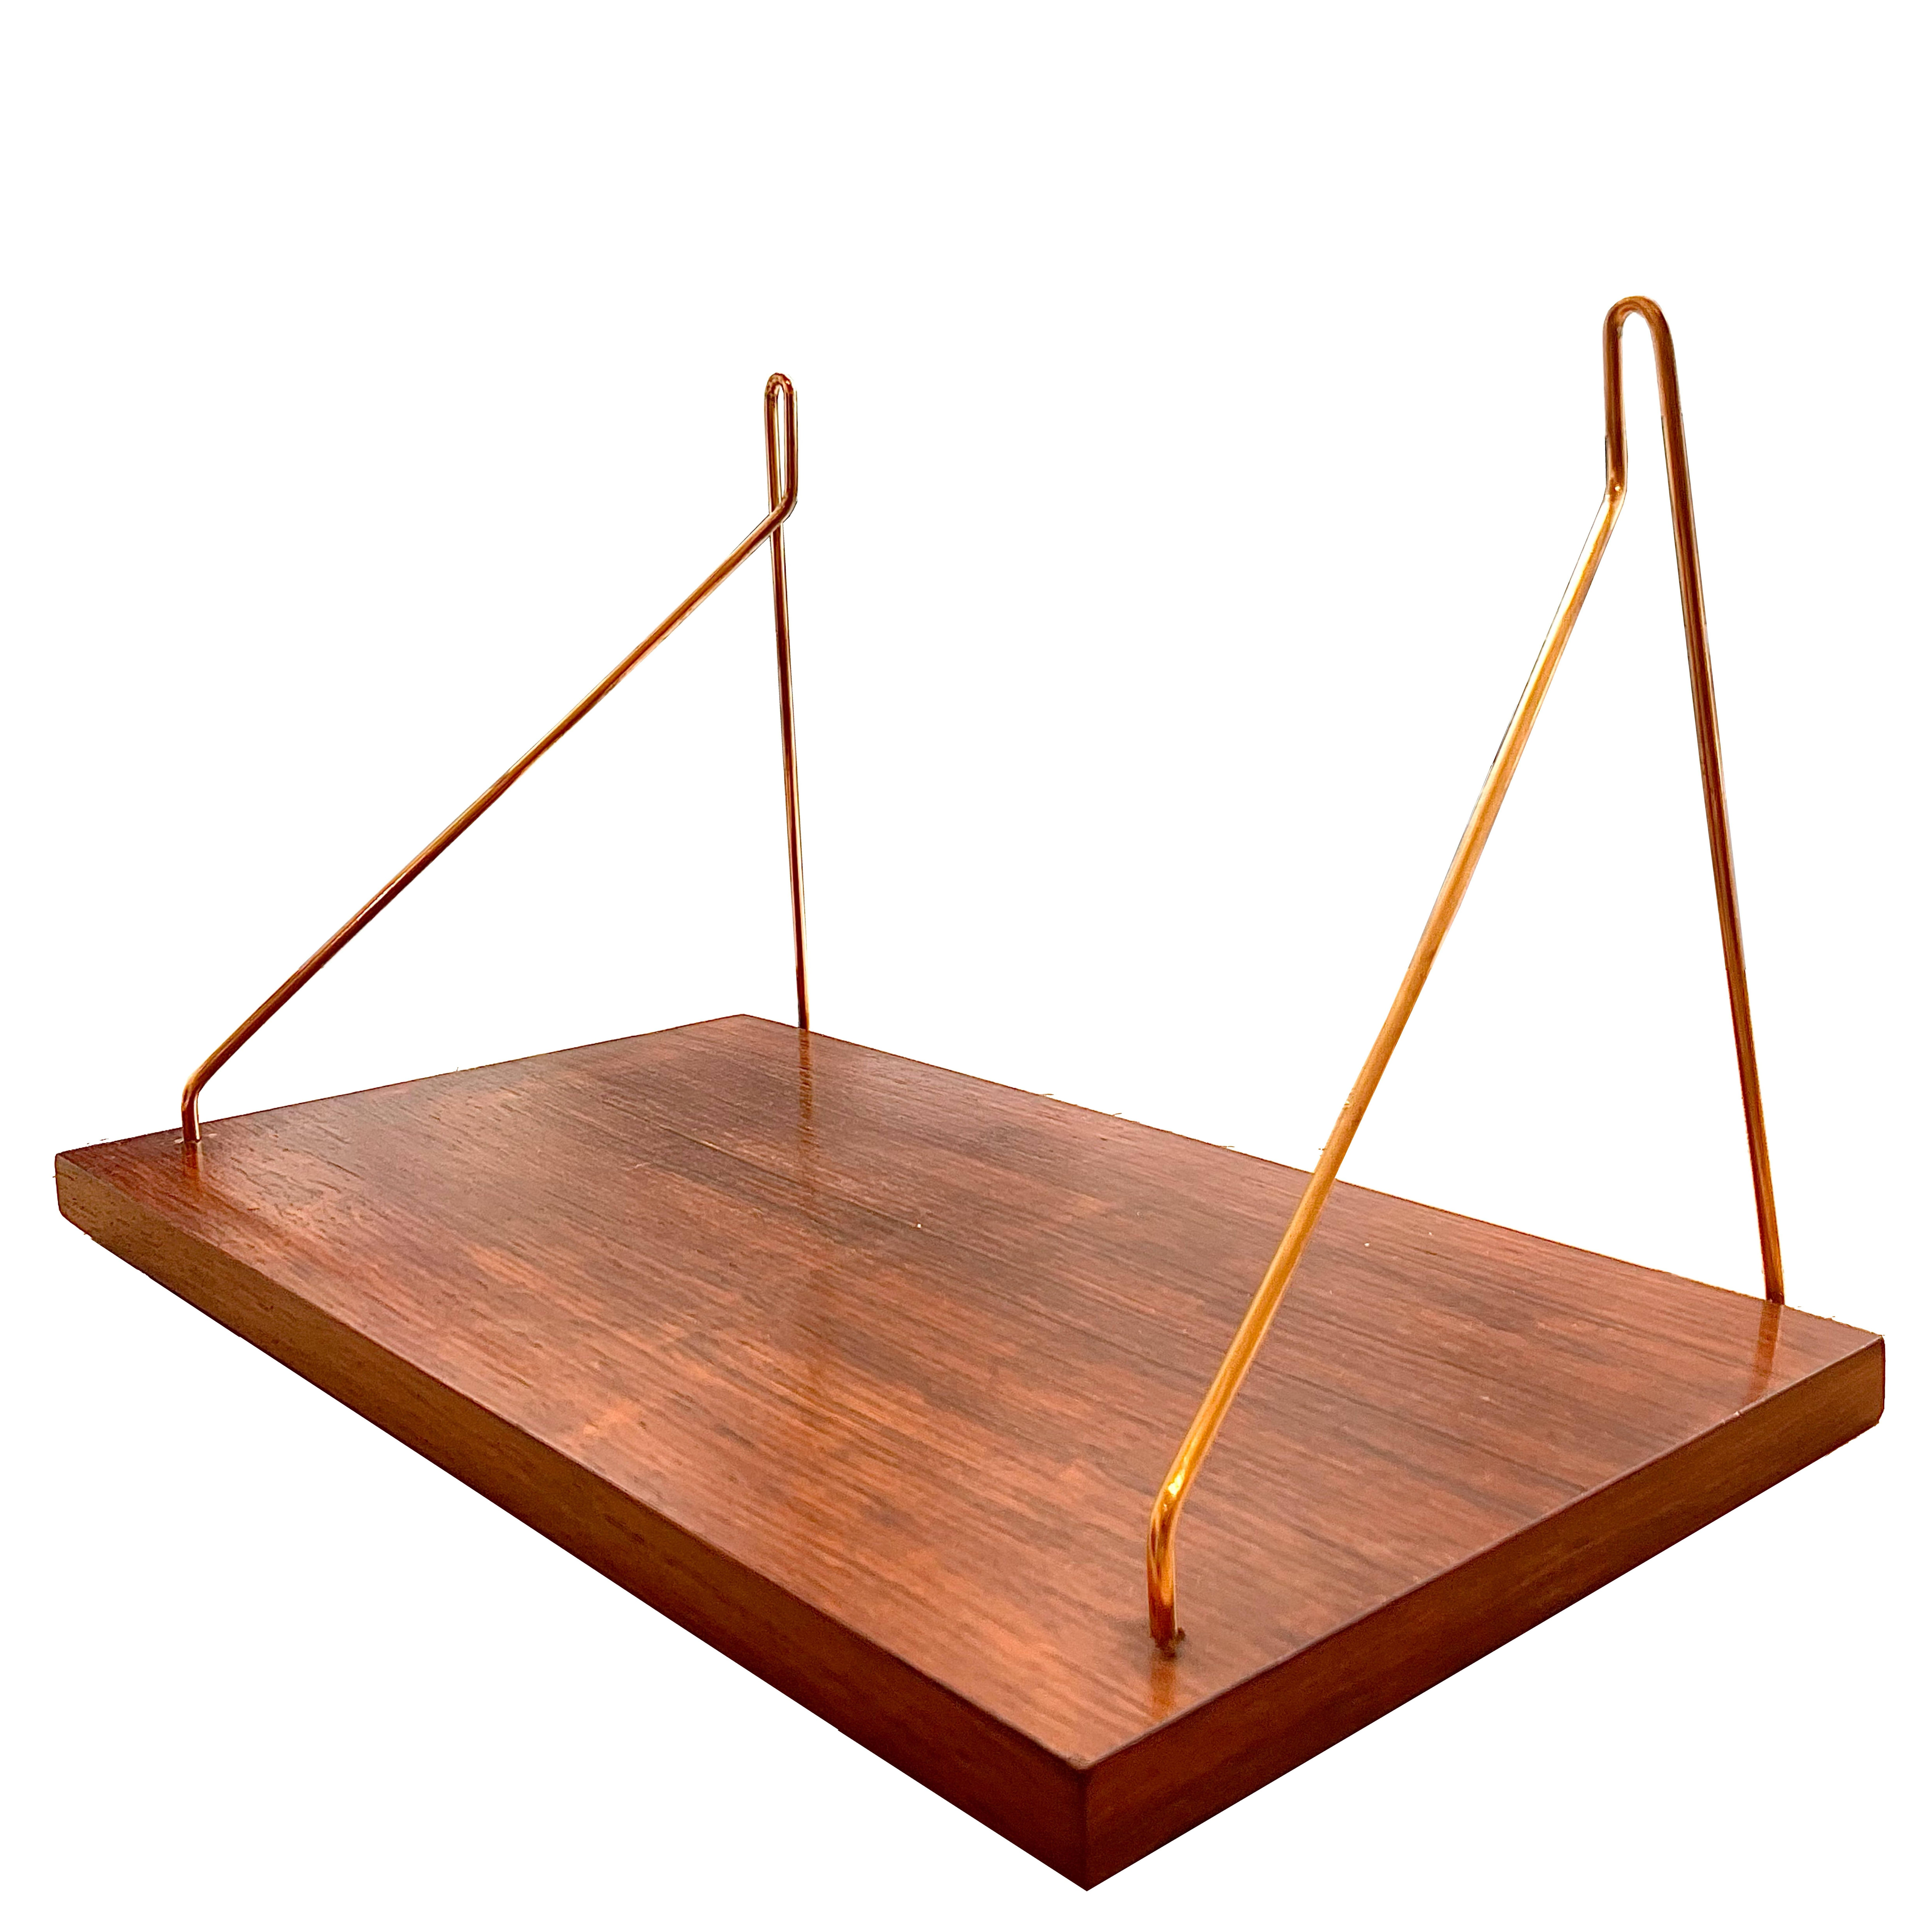 Vintage rosewood and brass shelves, Sweden, 1950s. In perfect condition.
Original Swedish shelf from the 1950s. Composed of a simple and minimalist system which allows easy and aesthetic hanging